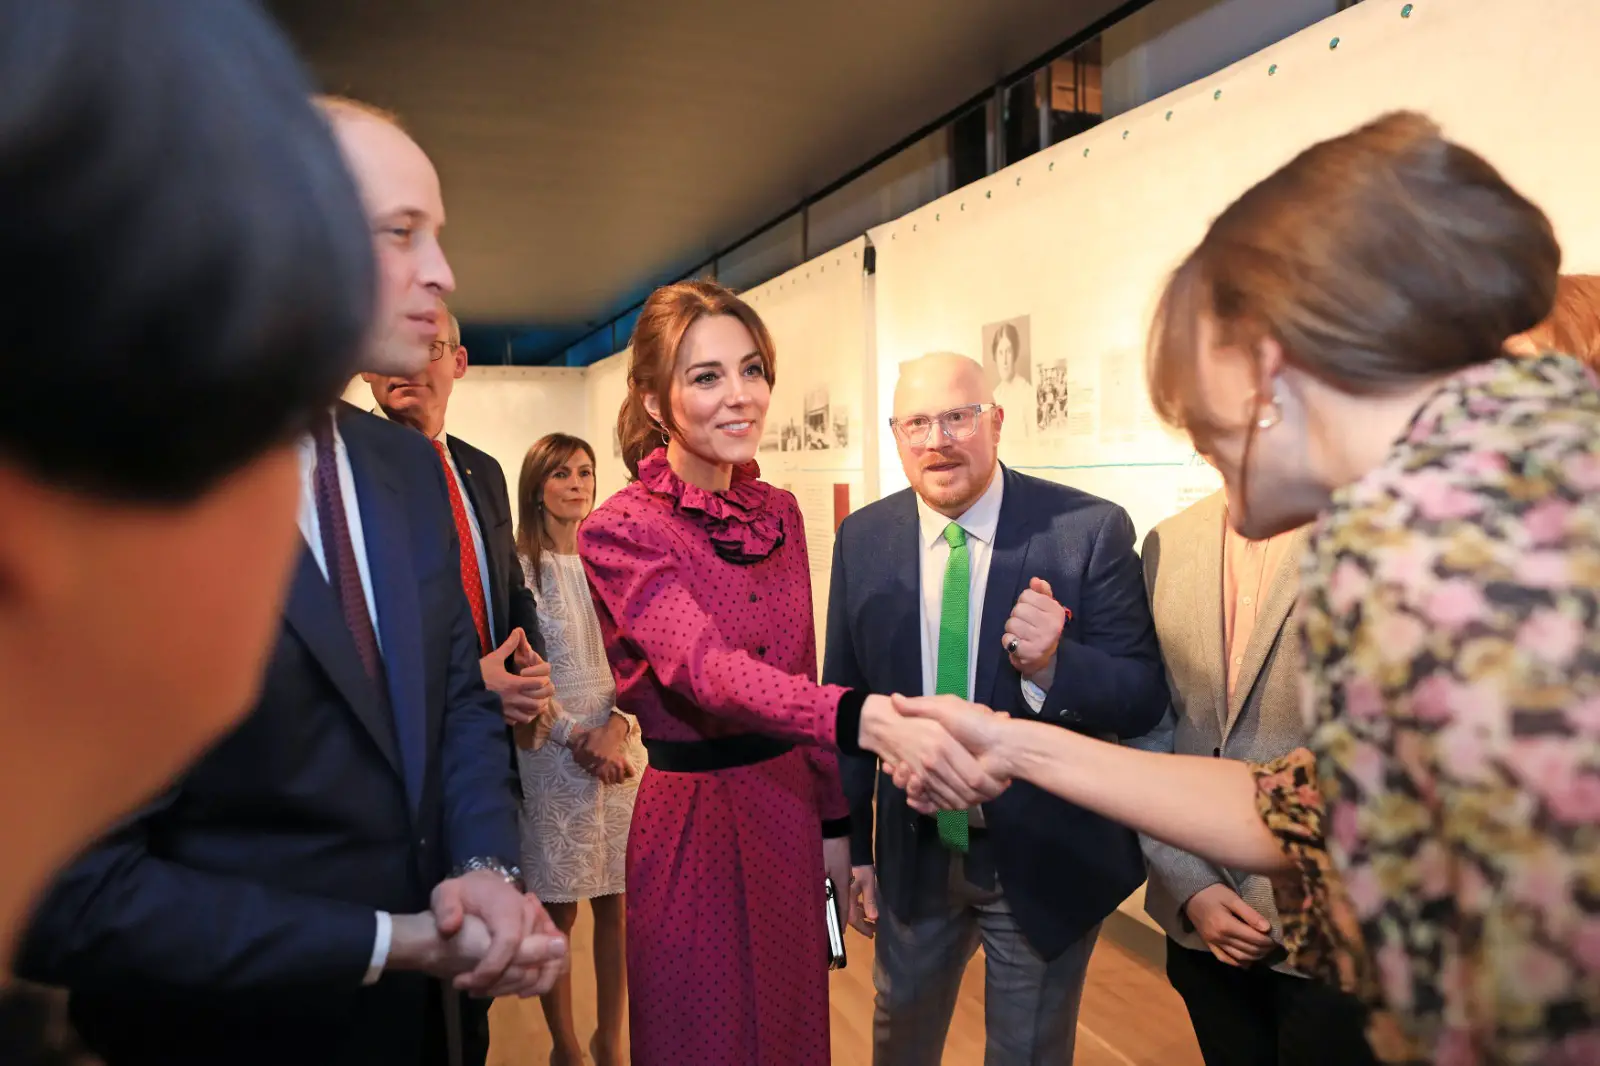 I very much welcome this visit by the Duke and Duchess, their first to Ireland, and hope this will be the first of many visits in the coming years